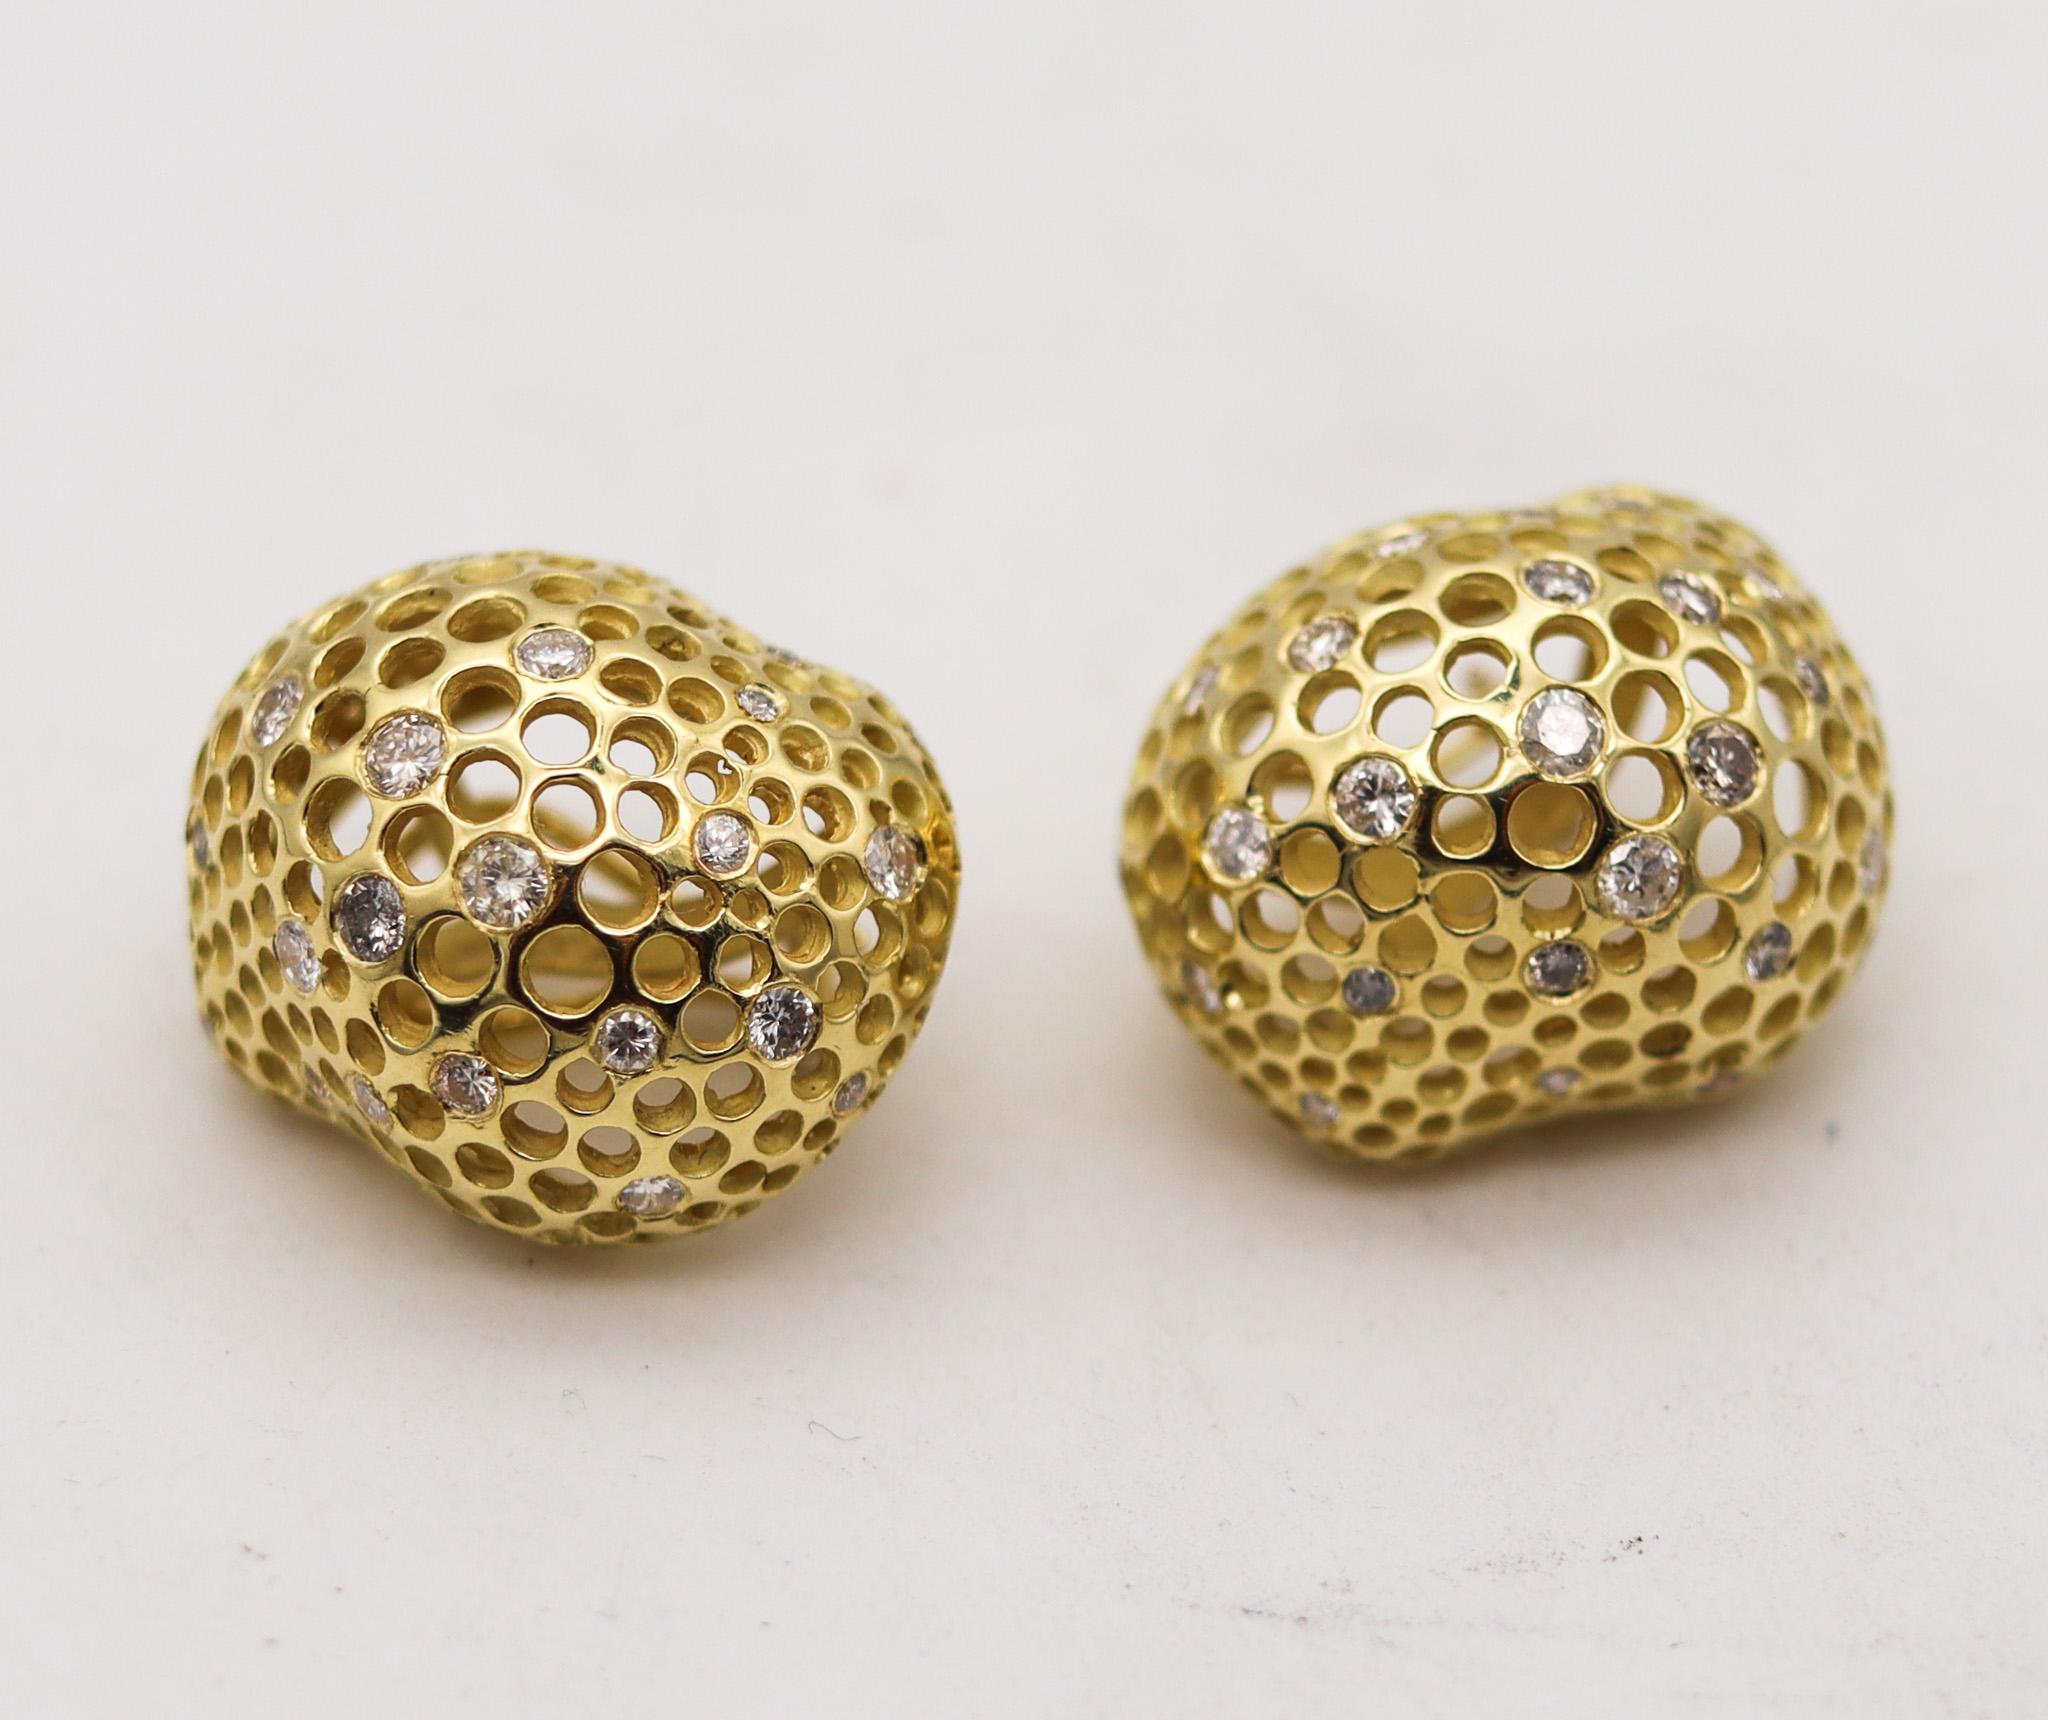 Pair of Perforations earrings designed by Angela Cummings.

Beautiful organic pair, created in New York city by Angela Cummings back in the early 1980's. These modernist Perforations free-form earrings has been crafted in solid yellow gold of 18